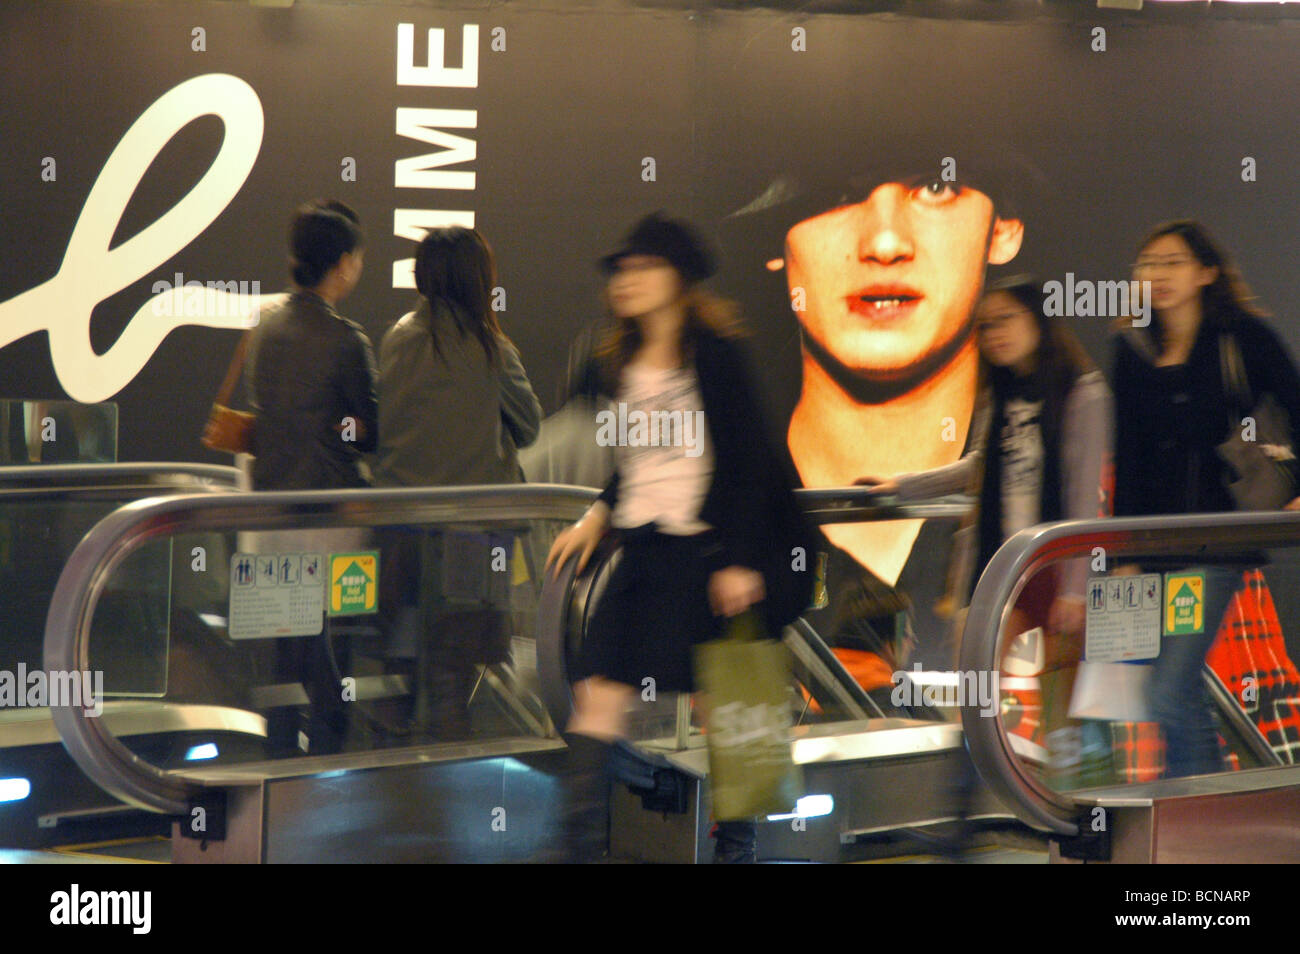 Trendy shoppers walk pass large advertisement in shopping mall, Shanghai, China Stock Photo